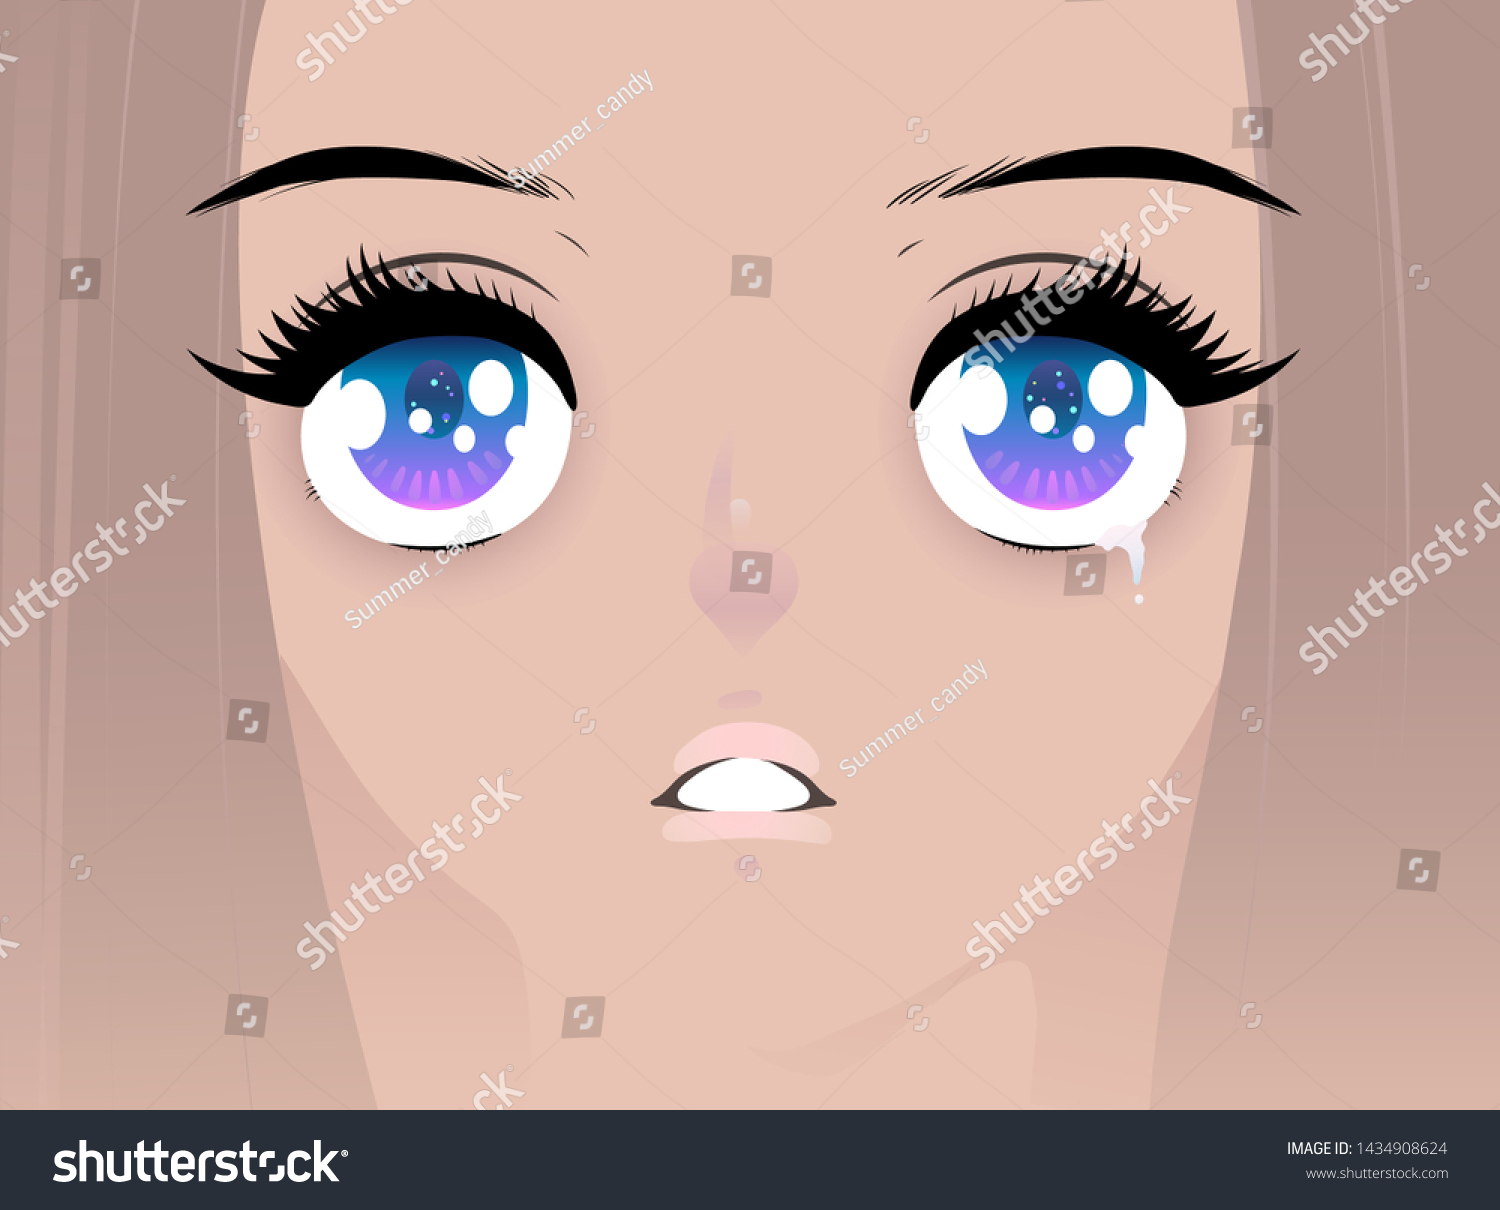 Featured image of post How To Draw Chibi Eyes Crying Once you know how to draw chibis you may find it much easier to draw these cute characters compared to typically proportioned characters